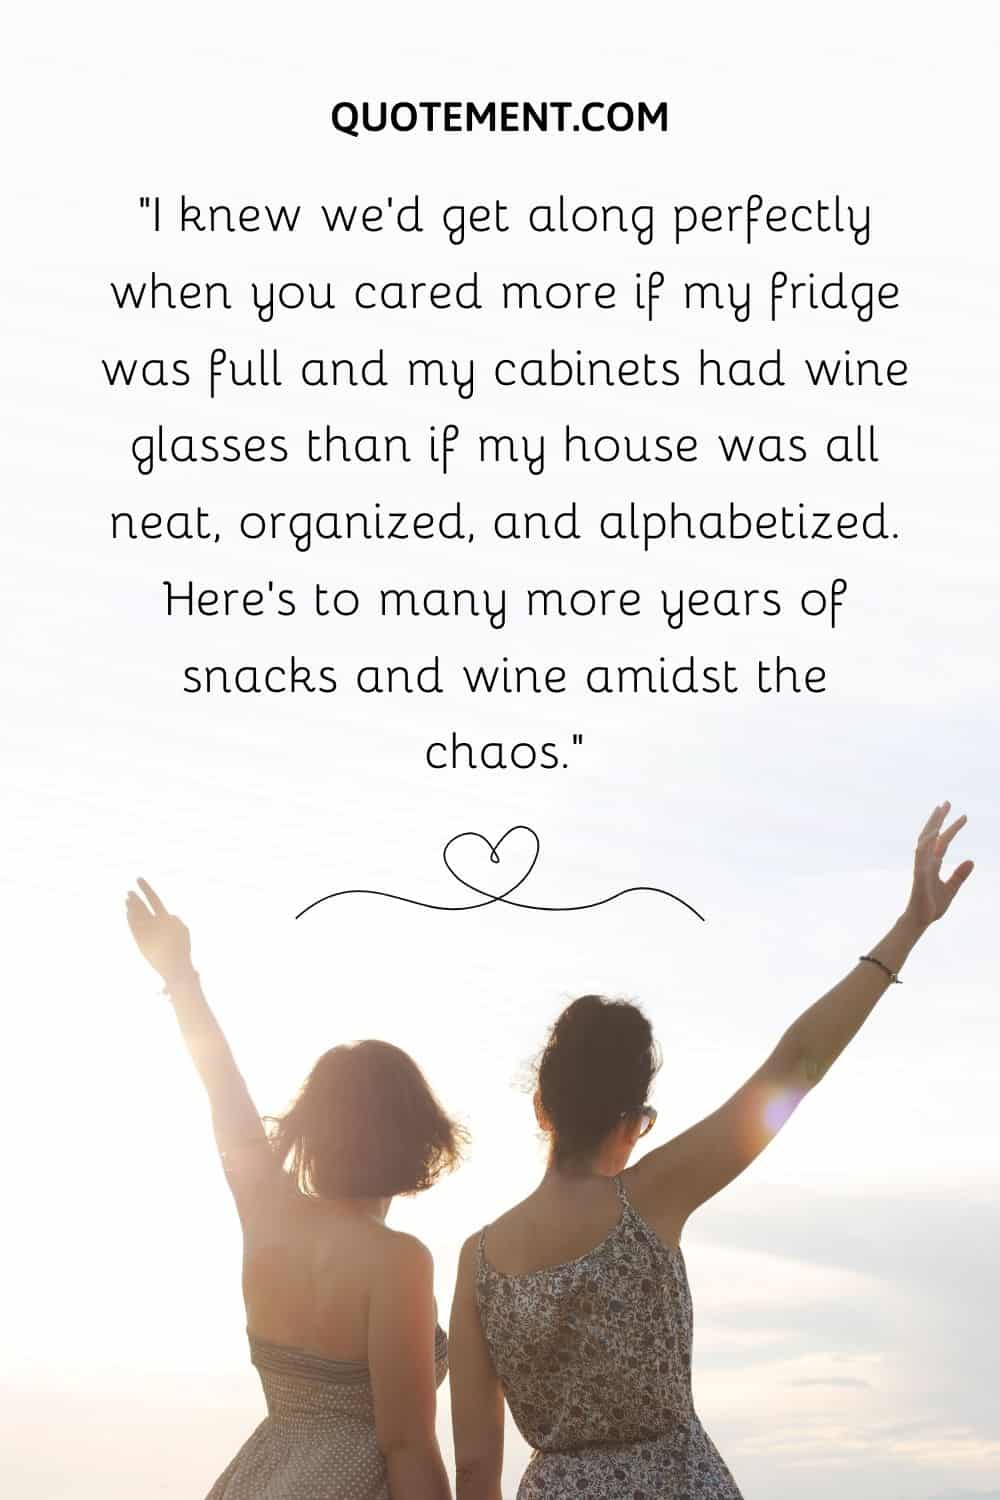 Here’s to many more years of snacks and wine amidst the chaos